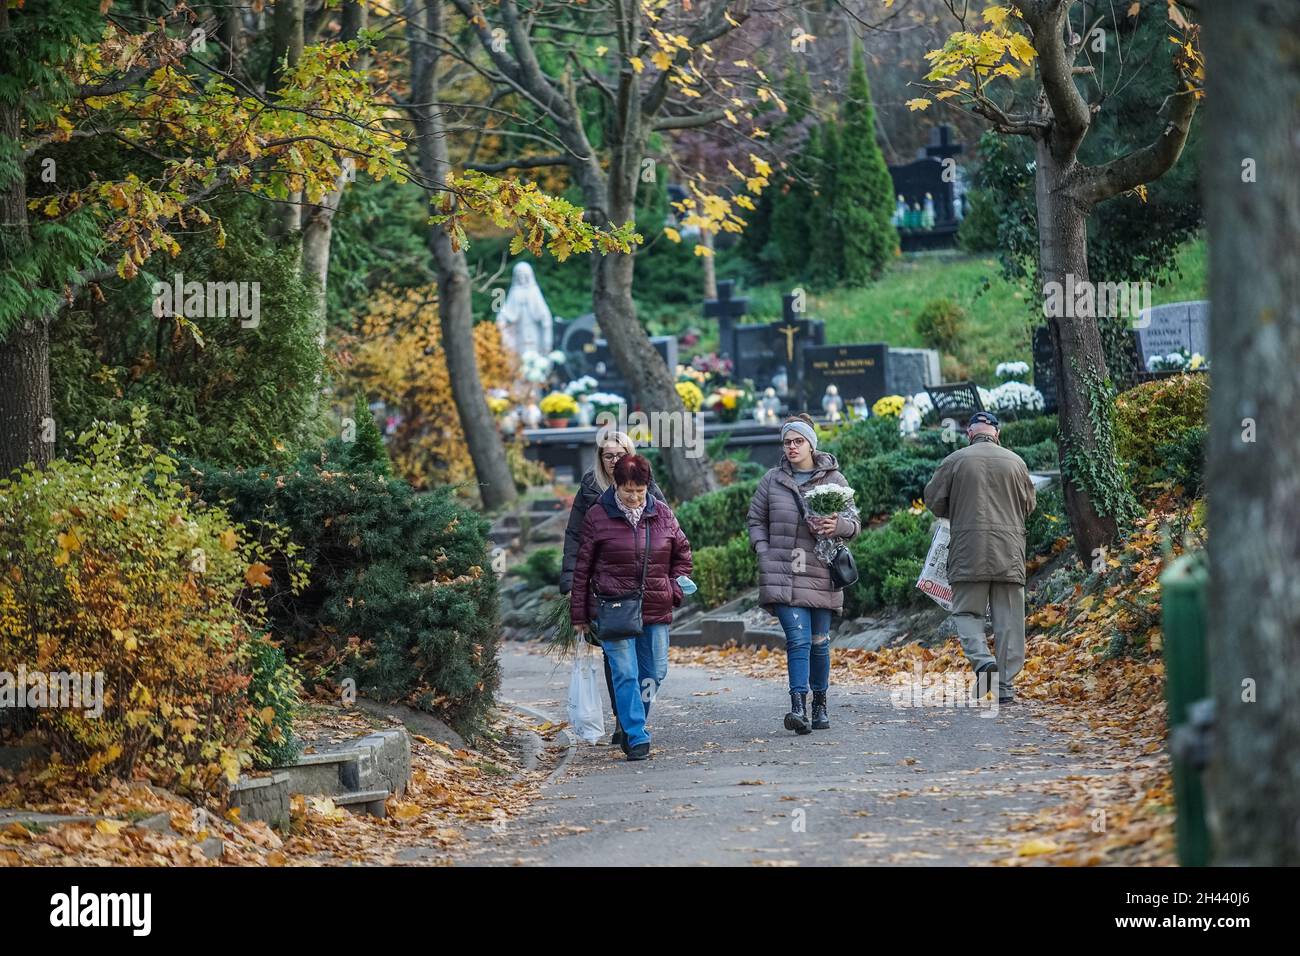 Gdansk, Poland 31st, Oct. 2021 People visiting graves of their relatives at the Lostowicki Cemetery are seen. Christian people celebrate All Saints Day (Wszystkich Swietych), pay respect to the dead family members, lay flowers and lit candles on their graves. All Saints' Day on 1 November and All Souls' Day on 2 November are when millions of Poles visit the graves of loved ones, often travelling hundreds of kilometres to their home towns. In 2021 as the 1st Nov is on Monday many of people visit graves on the weekend preceding that day. (Photo by Vadim Pacajev/Sipa USA) Stock Photo